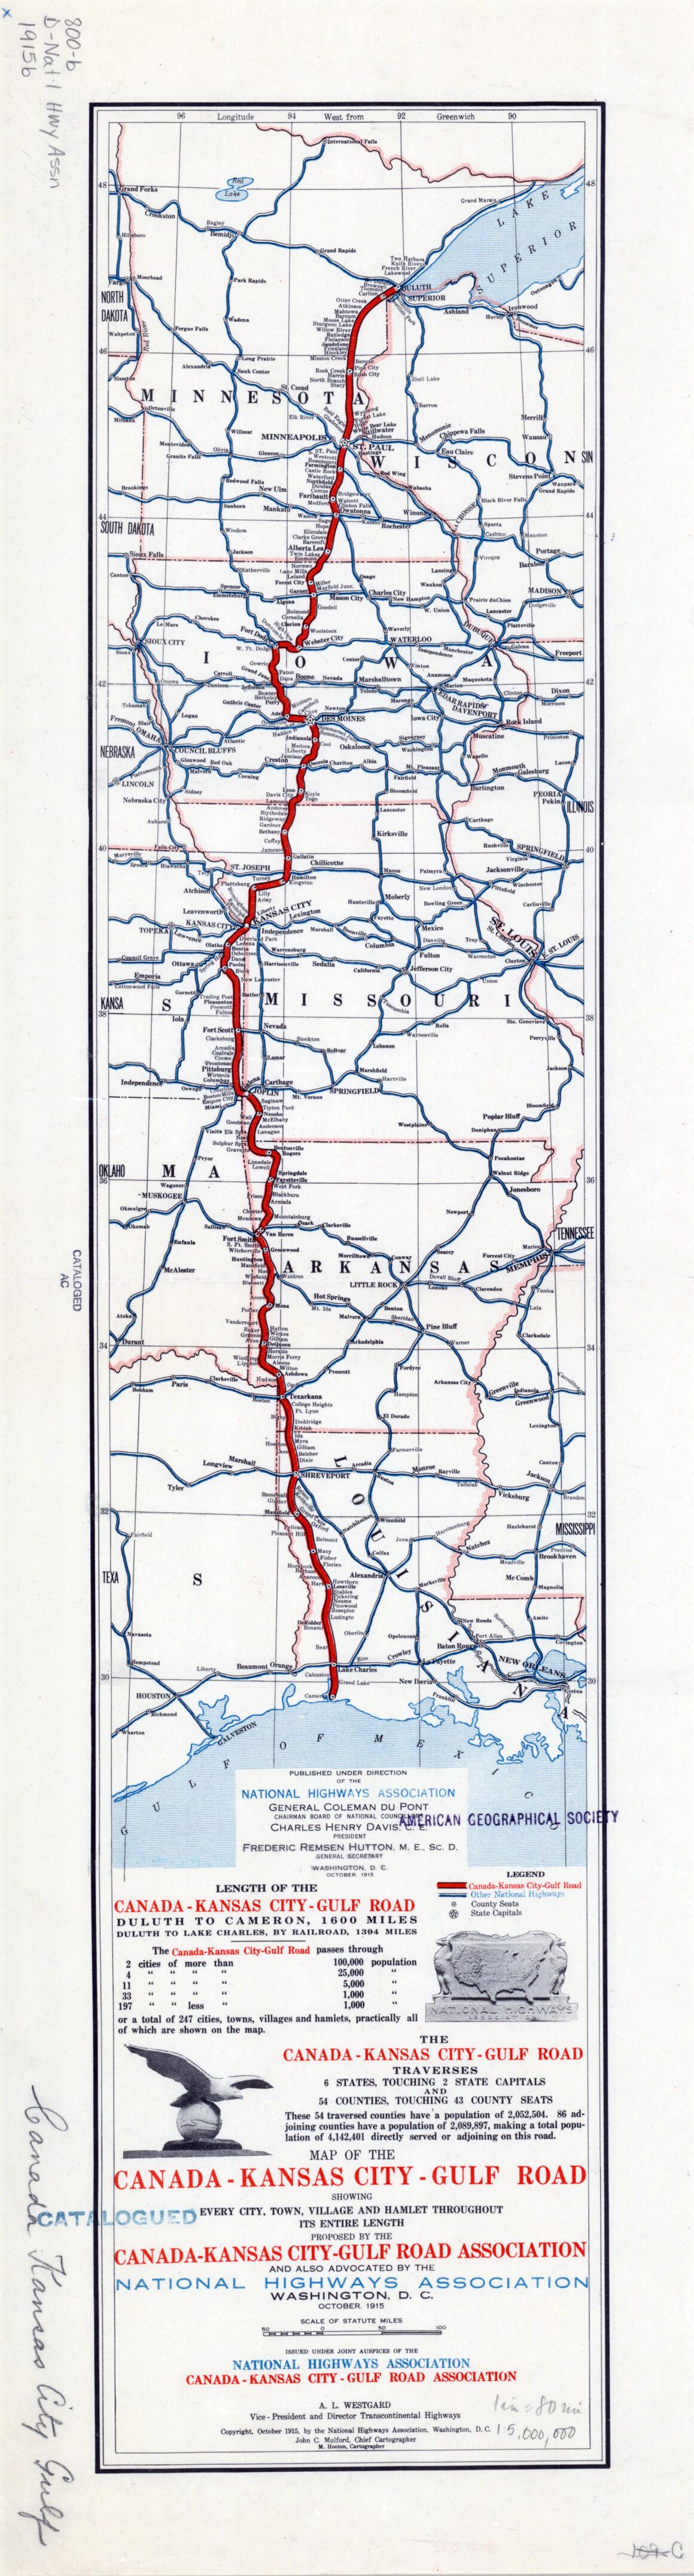 This old map of -Kansas City--Gulf Road. (Kansas City-Gulf Road: Showing Every City, Town, Village and Hamlet Throughout Its Entire Length) from 1915 was created by  Kansas City-Gulf Road Association, M. Hooton, John C. Mulford,  National Highways Associ